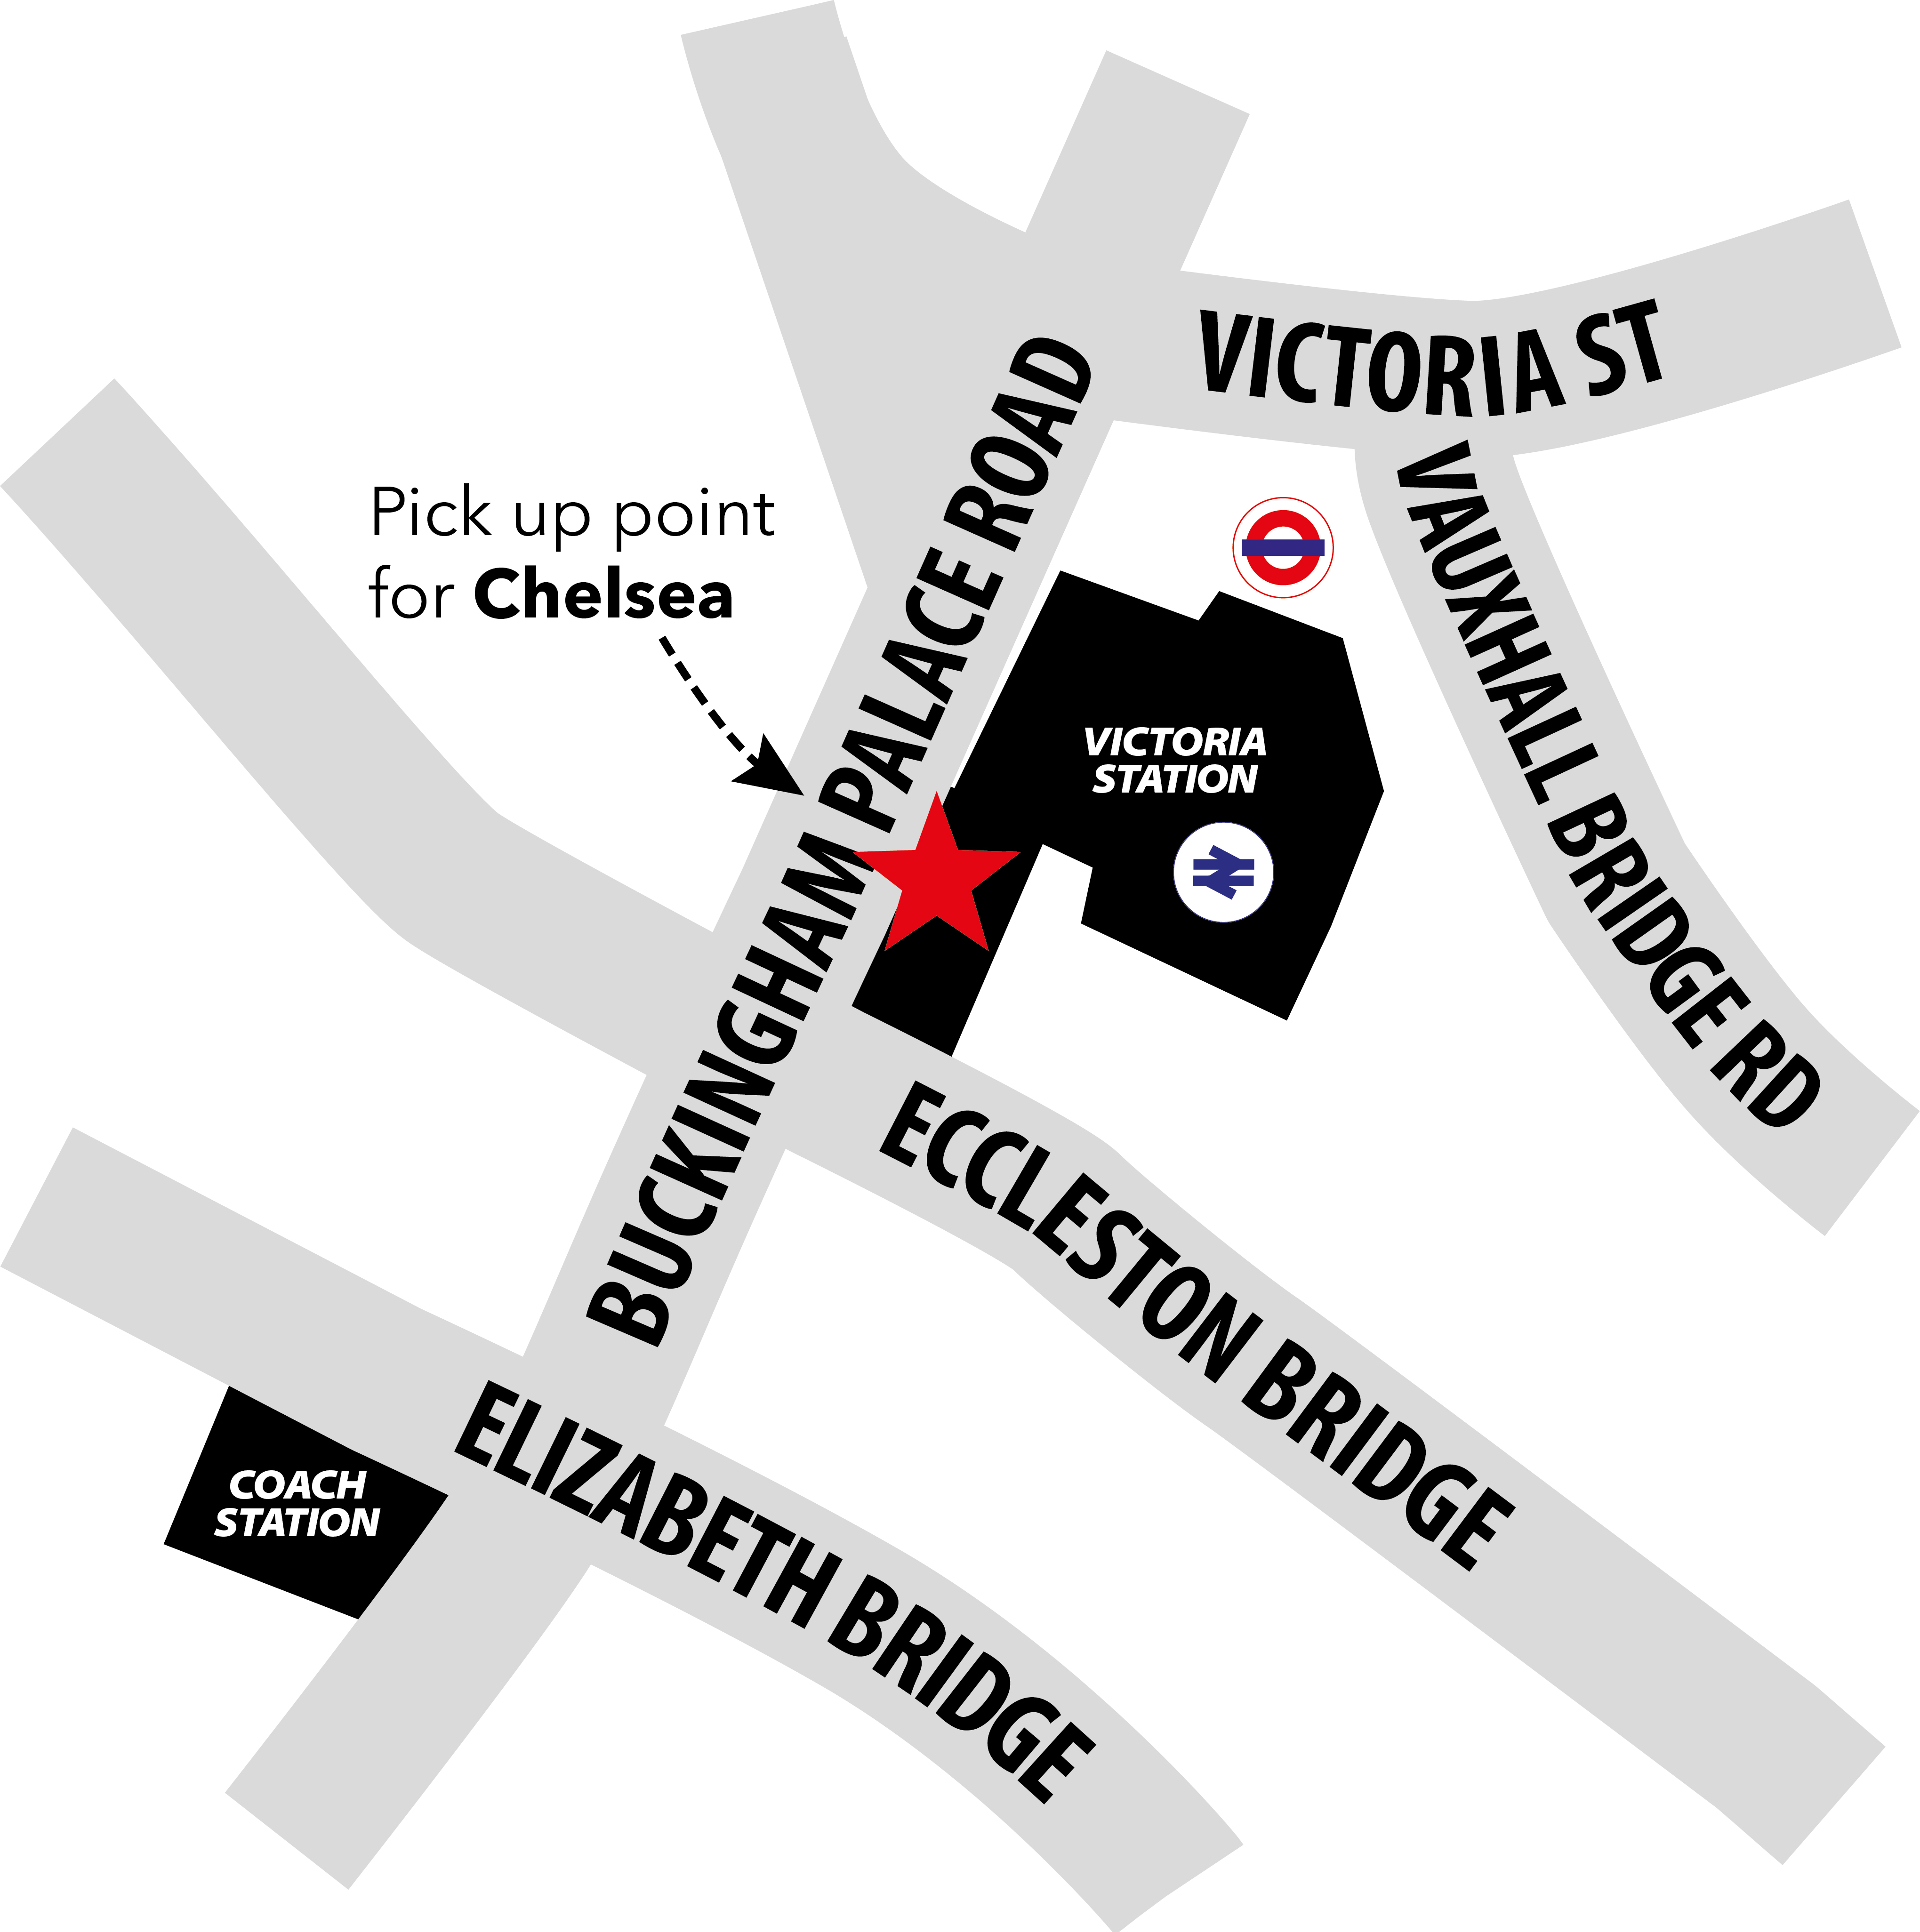 Where to pick to at Victoria